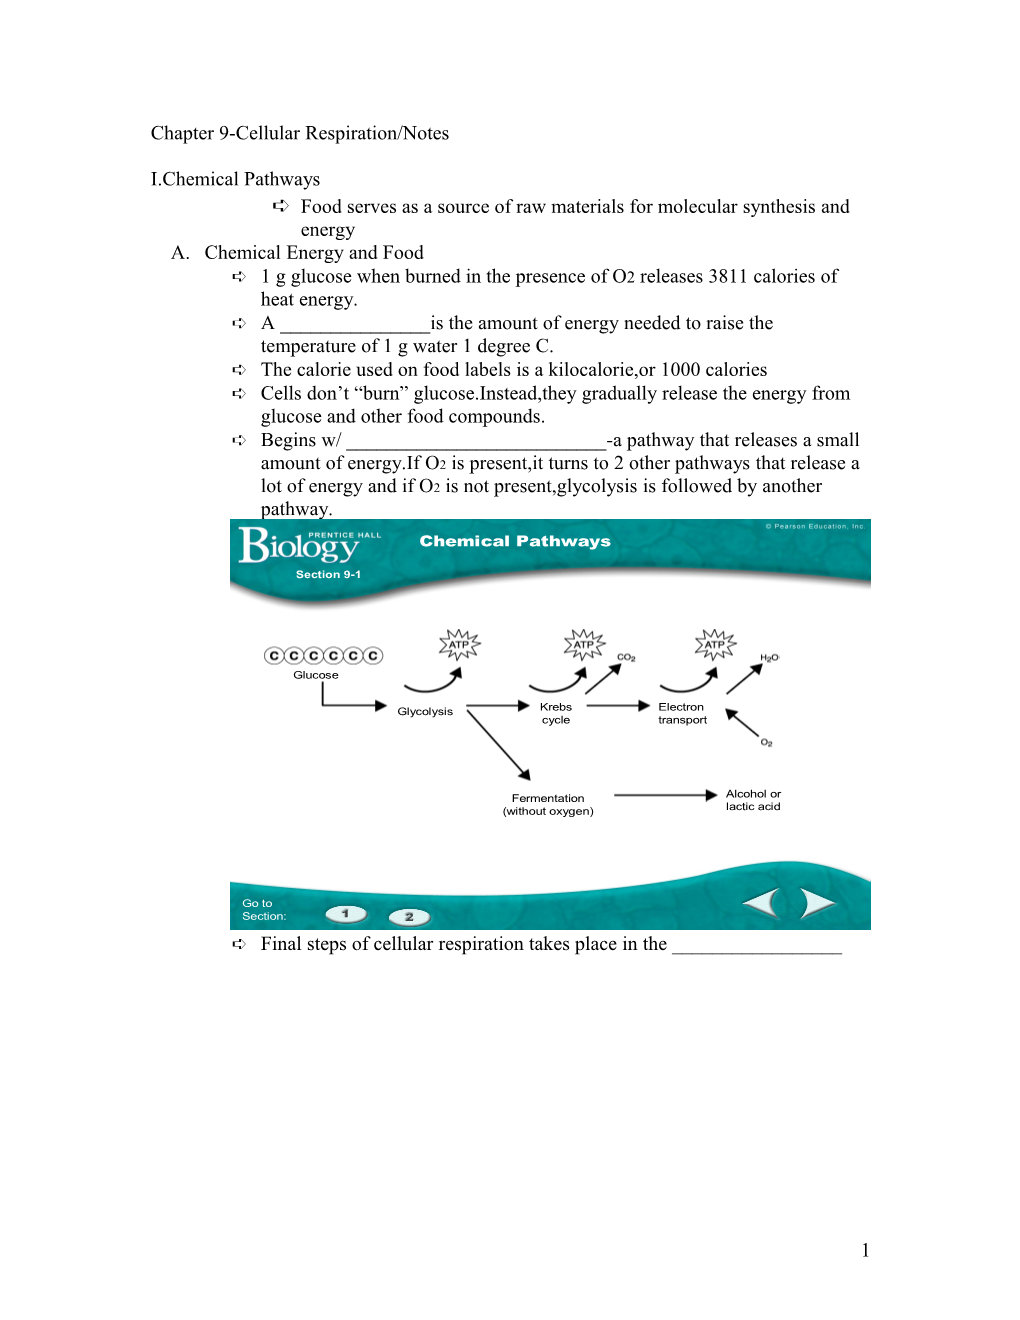 Chapter 9-Cellular Respiration/Notes